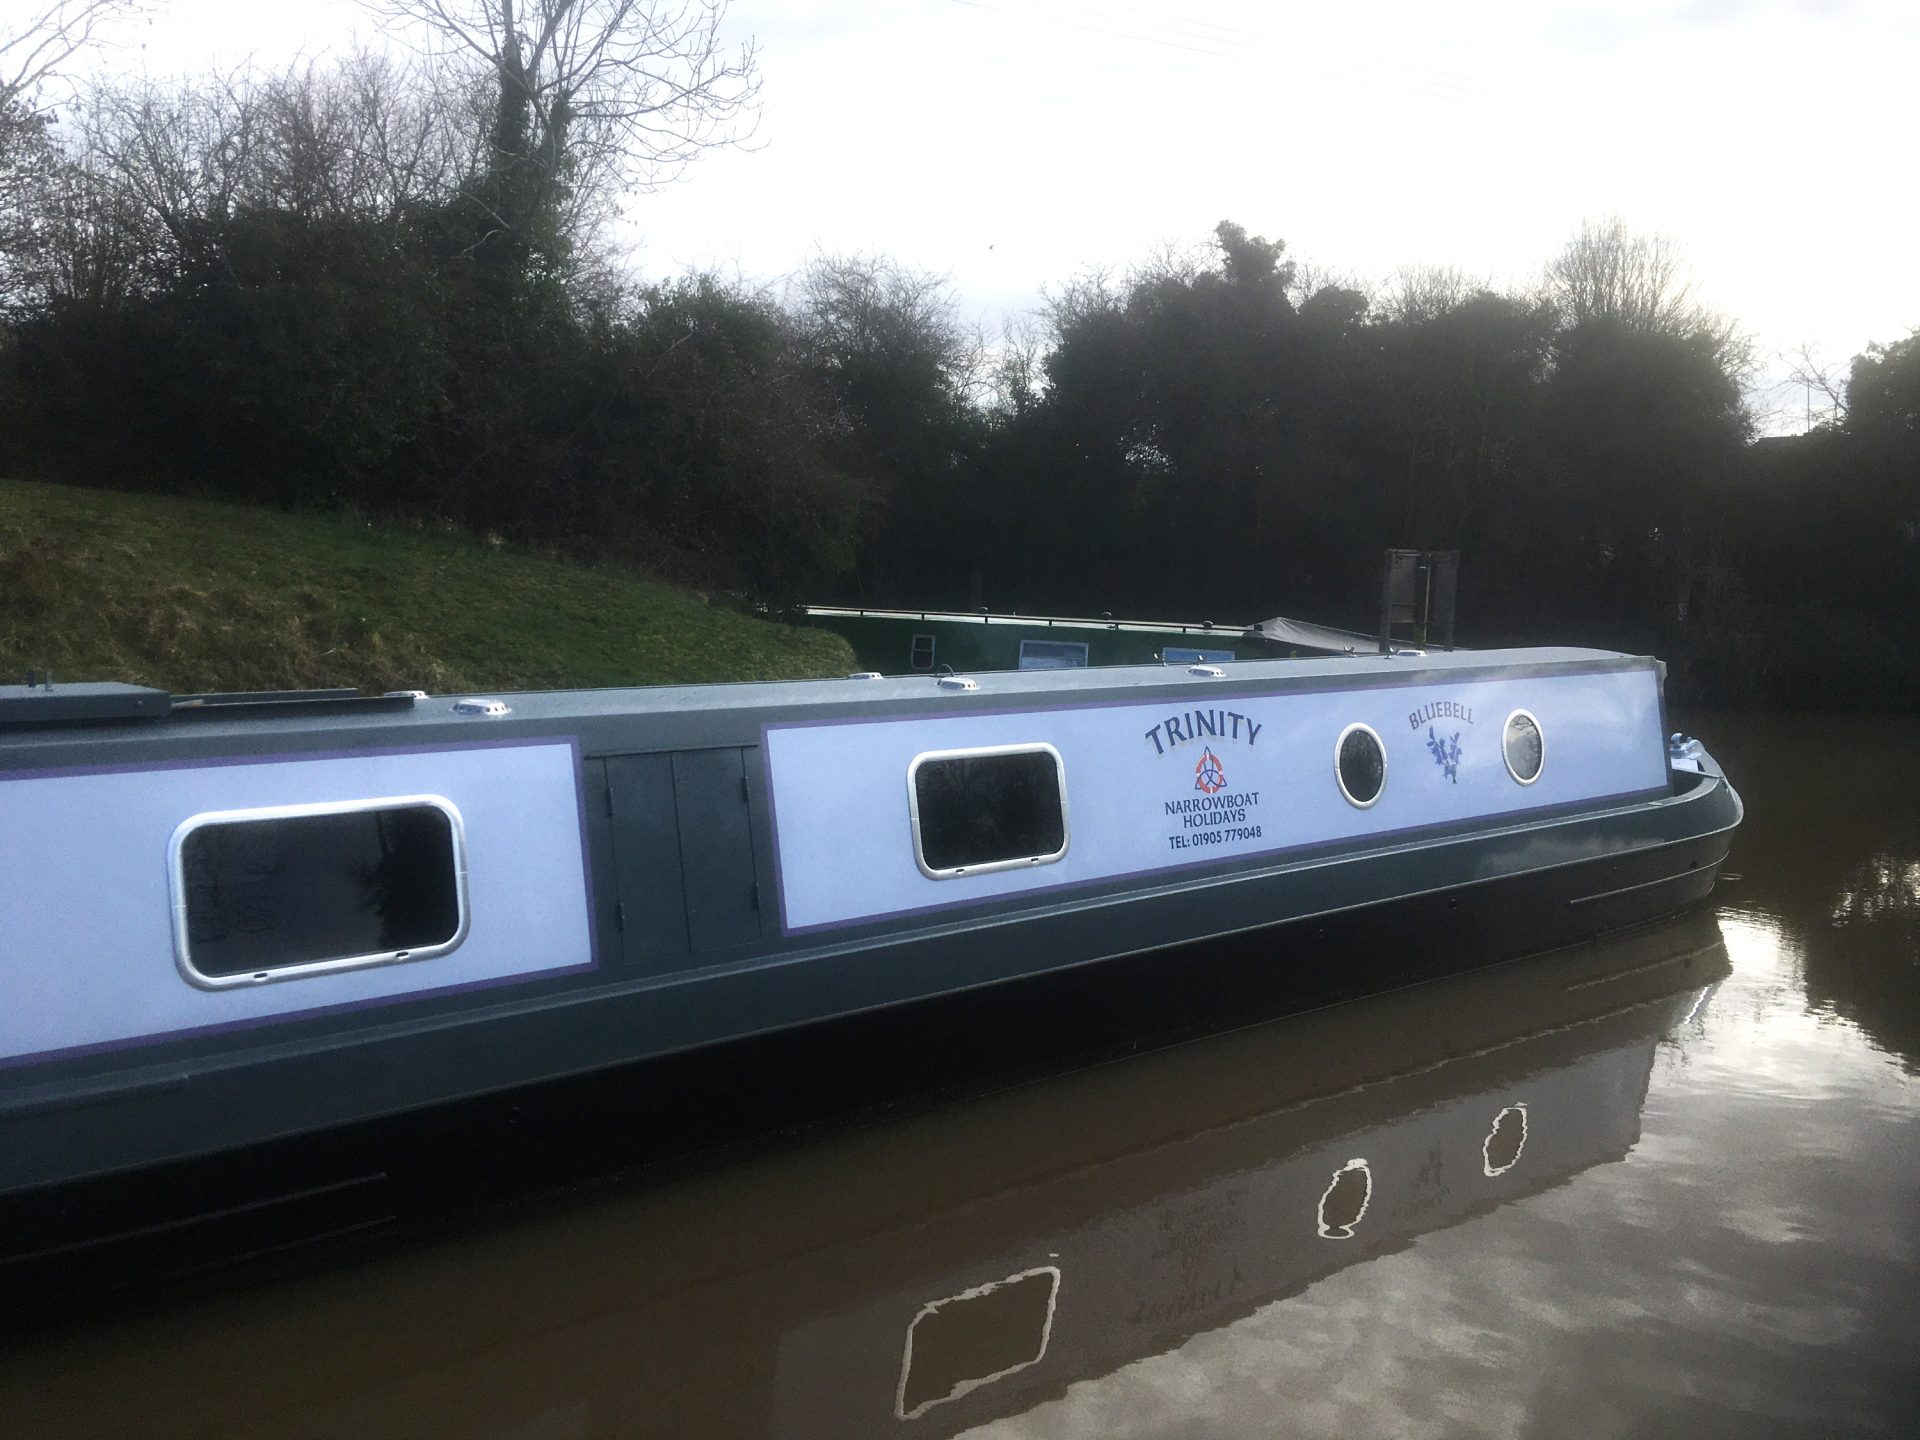 The TR-Bluebell class canal boat